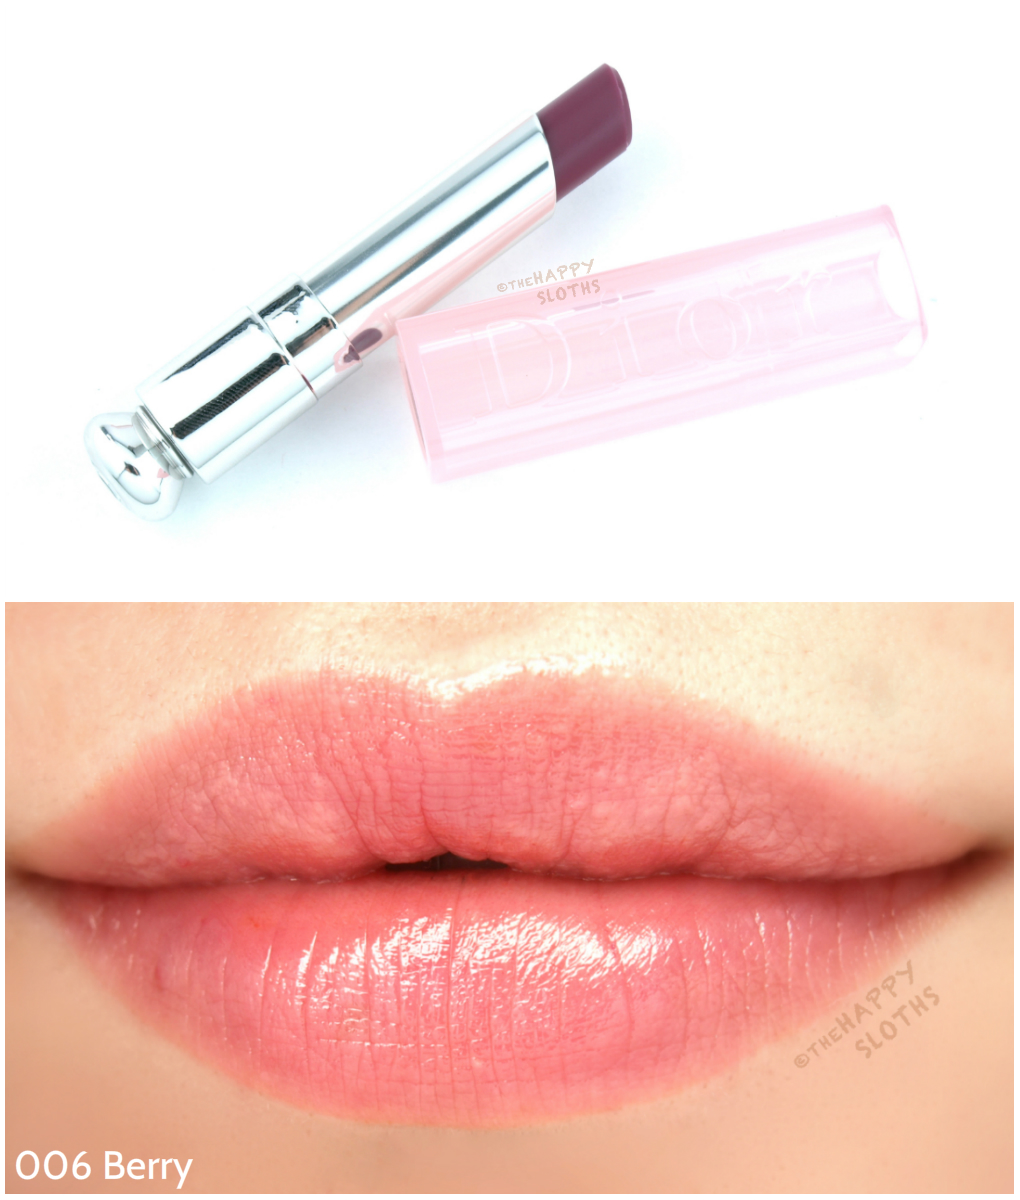 Dior Addict Lip Glow in "006 Berry": Review and Swatches